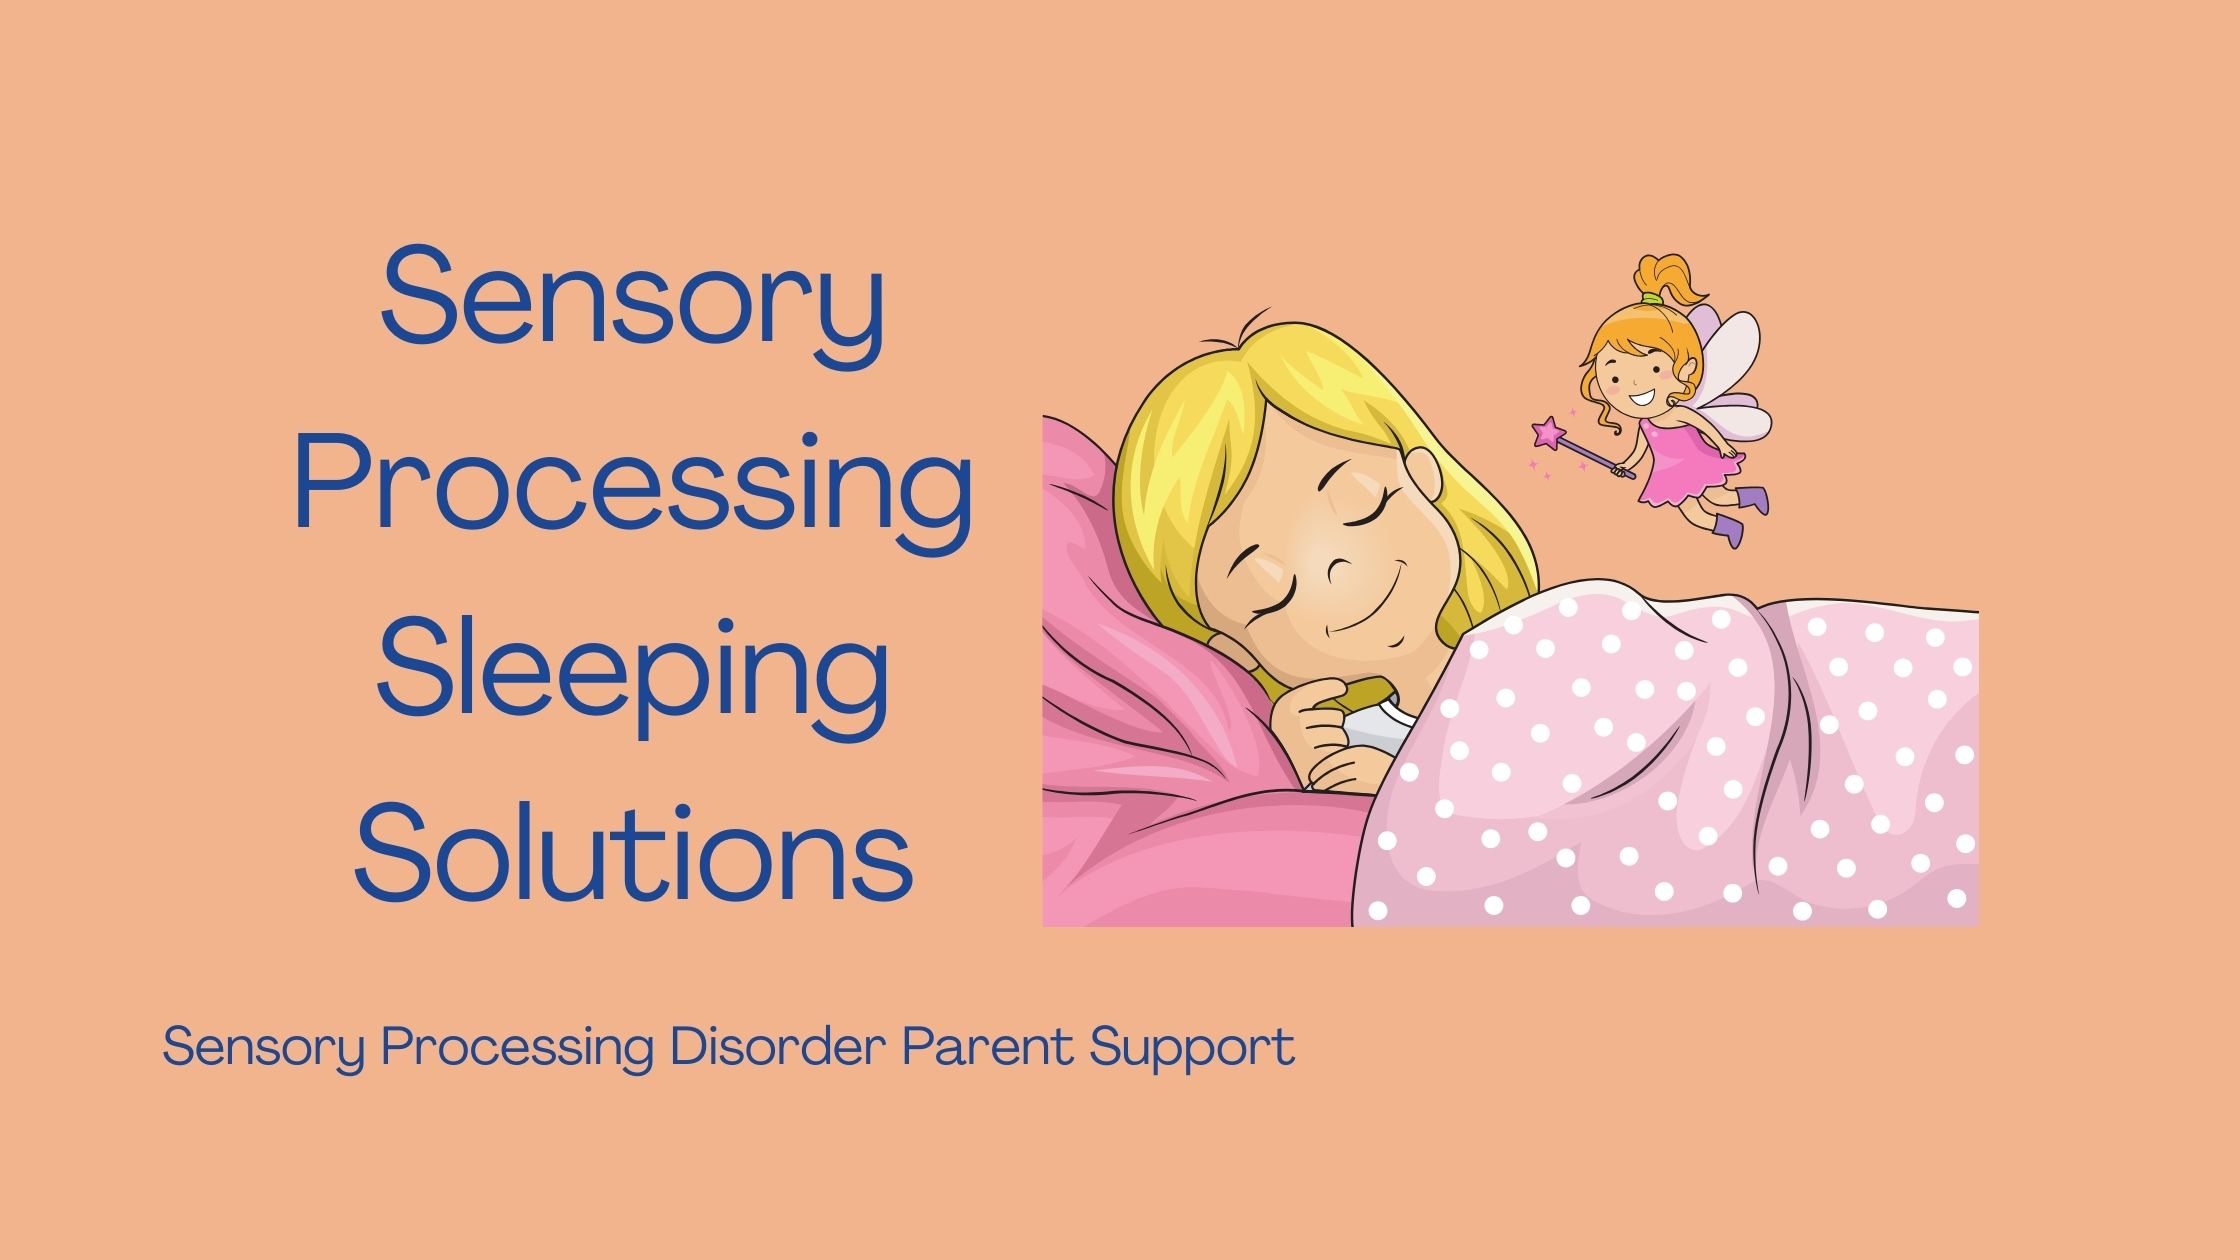 child with sensory processing disorder sleeping in their bed Sensory Processing Sleeping Solutions